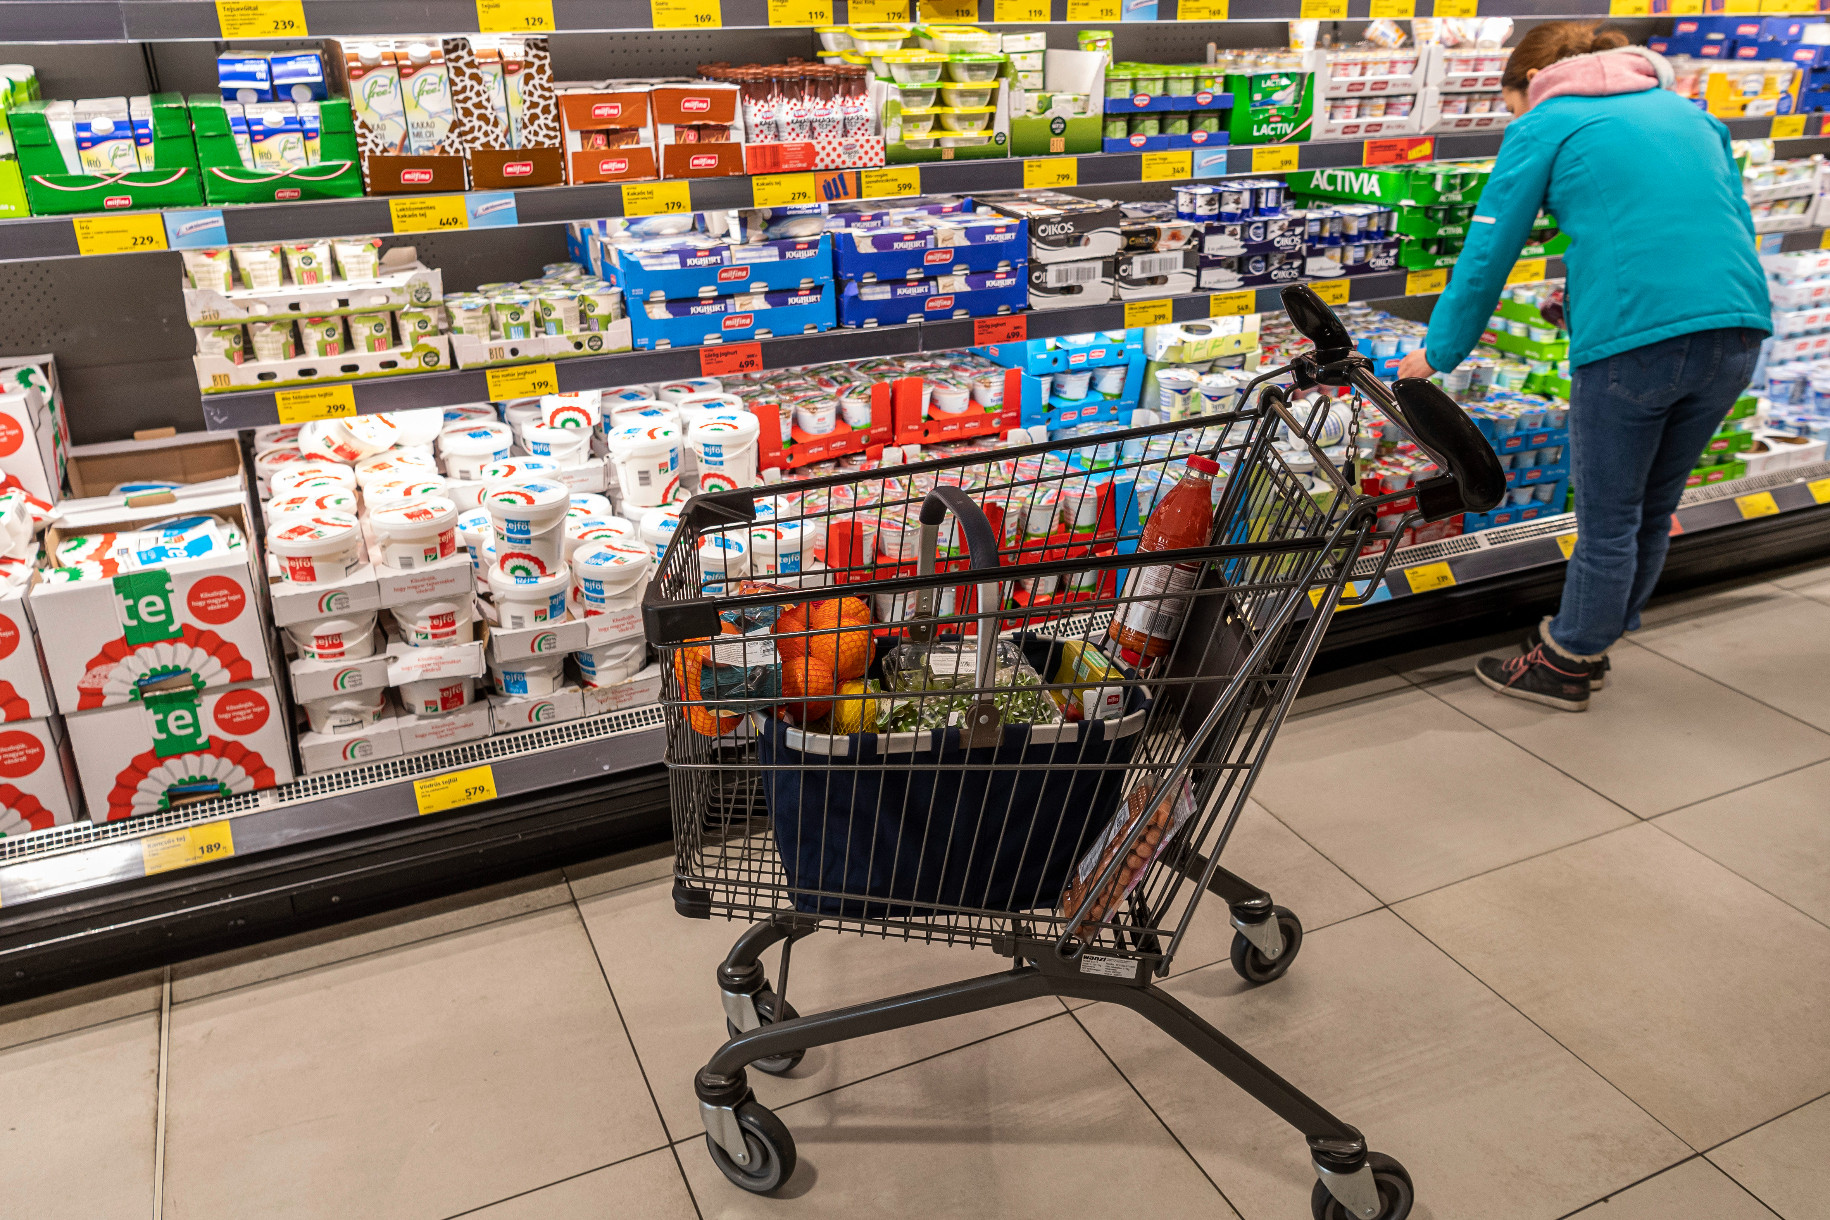 Multinational Supermarkets in Hungary Have 'Unjustifiably Overpriced Products Recently', Says Gov't